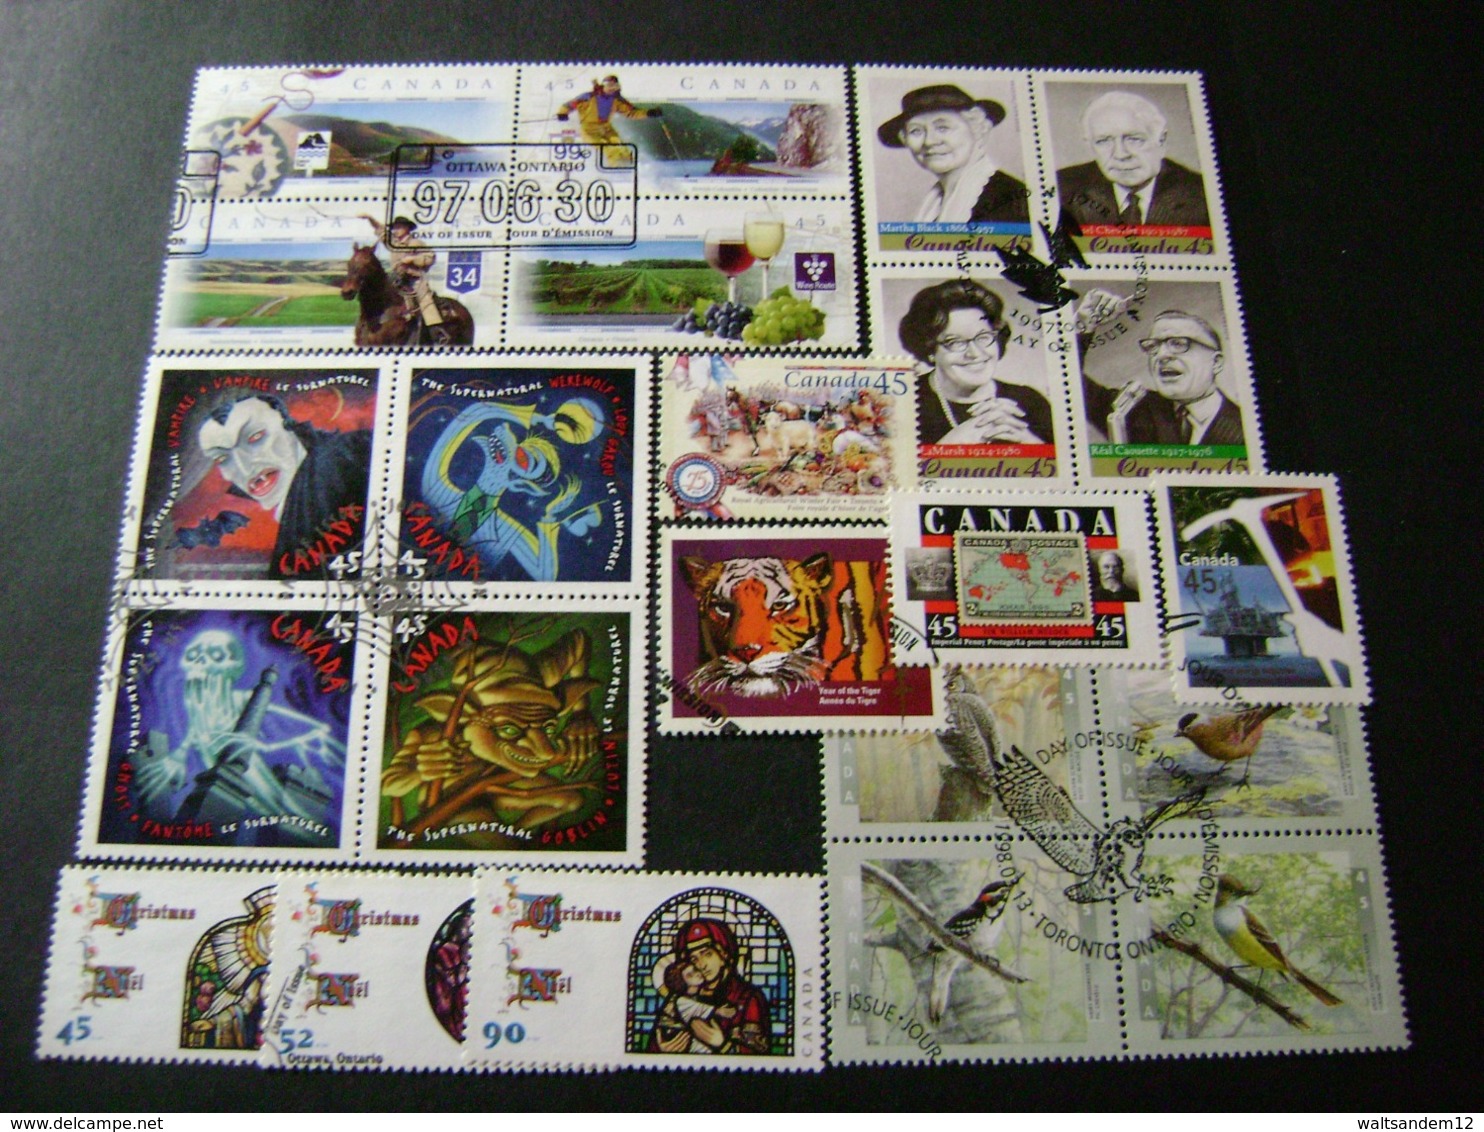 Canada 1996 to 1998 Commemorative/special issues complete (between SG 1673 and 1861 - see description) 9 images - Used